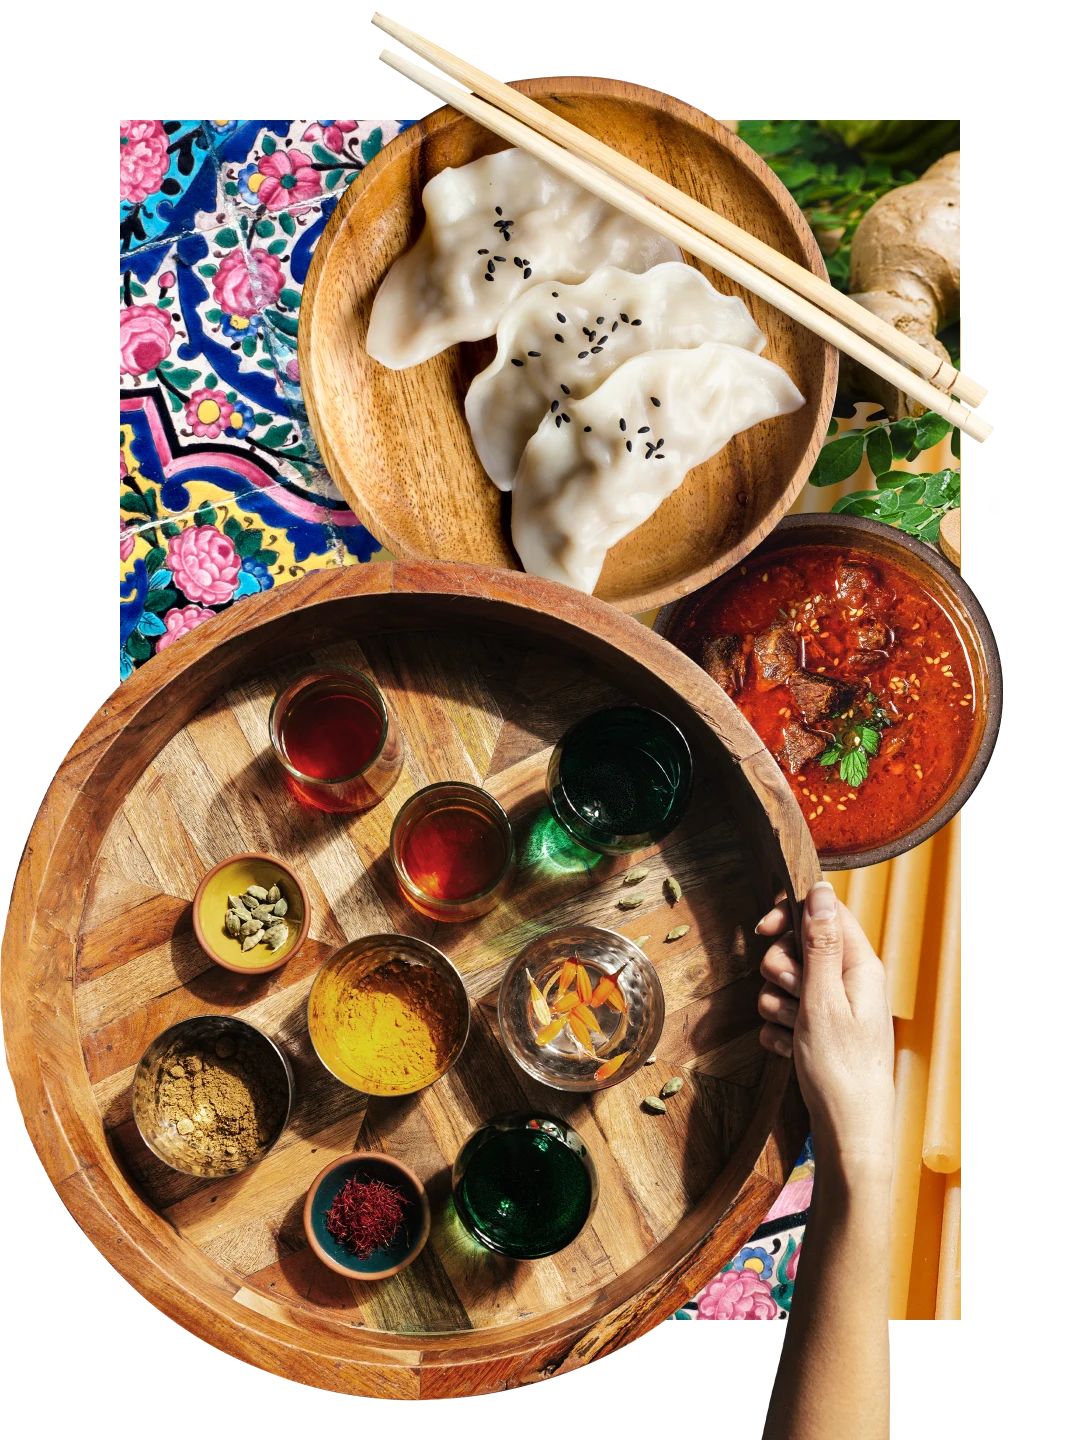 Collage of aerial views of meals. At the top, there is a brown bowl with chopsticks on top and three dumplings inside. A platter of oils and spices is on the left, with a glass bowl of red sauce on the right and a colourful table underneath with a pattern of roses.
